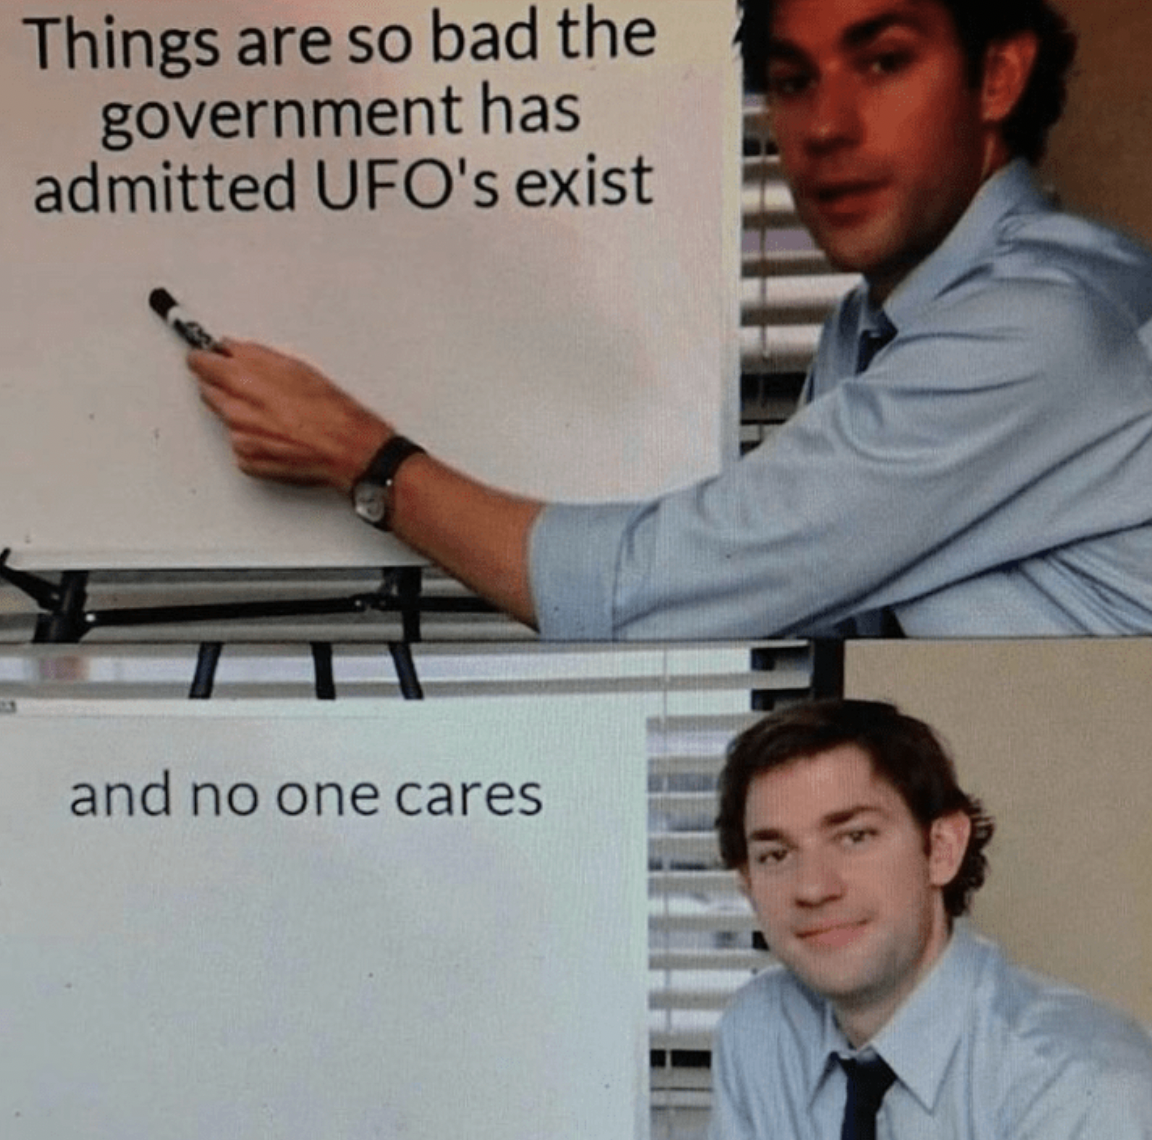 Things are so bad the government has admitted Ufo's exist and no one cares